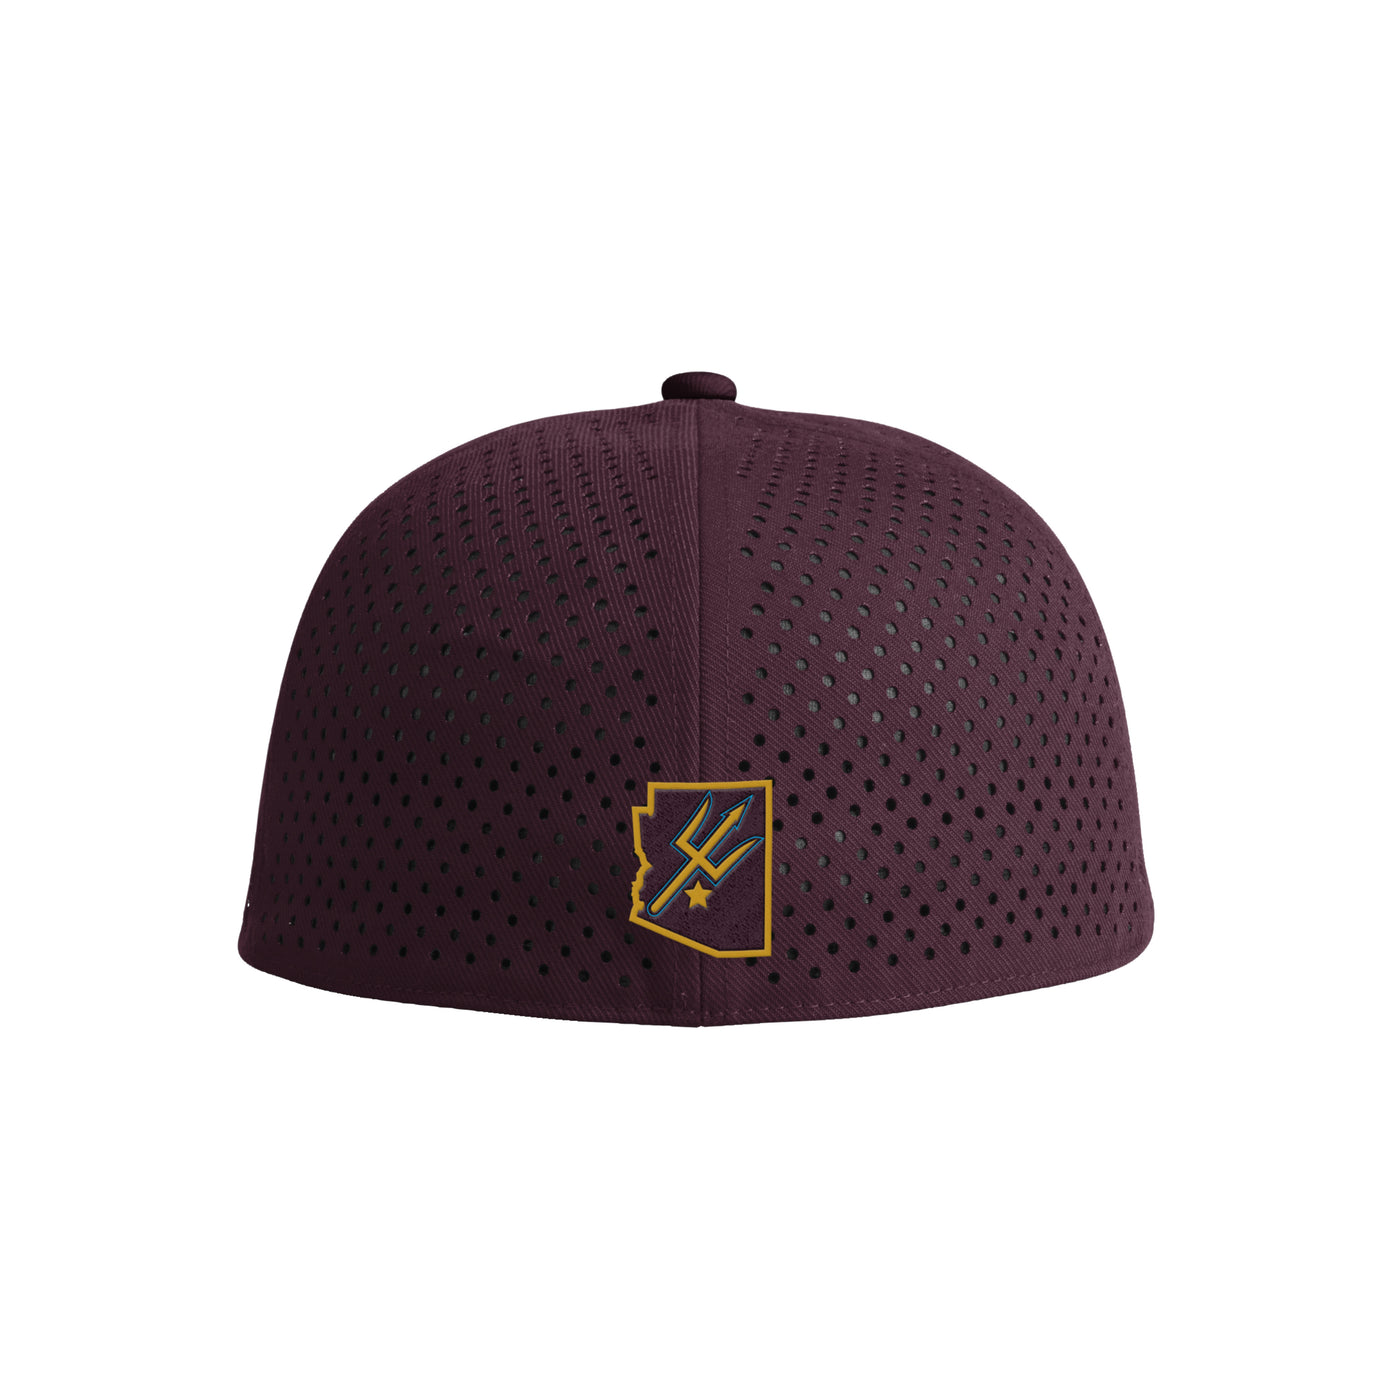 Back of maroon ASU hat with performance ventilation detailing and the outline of the state of Arizona at the bottom